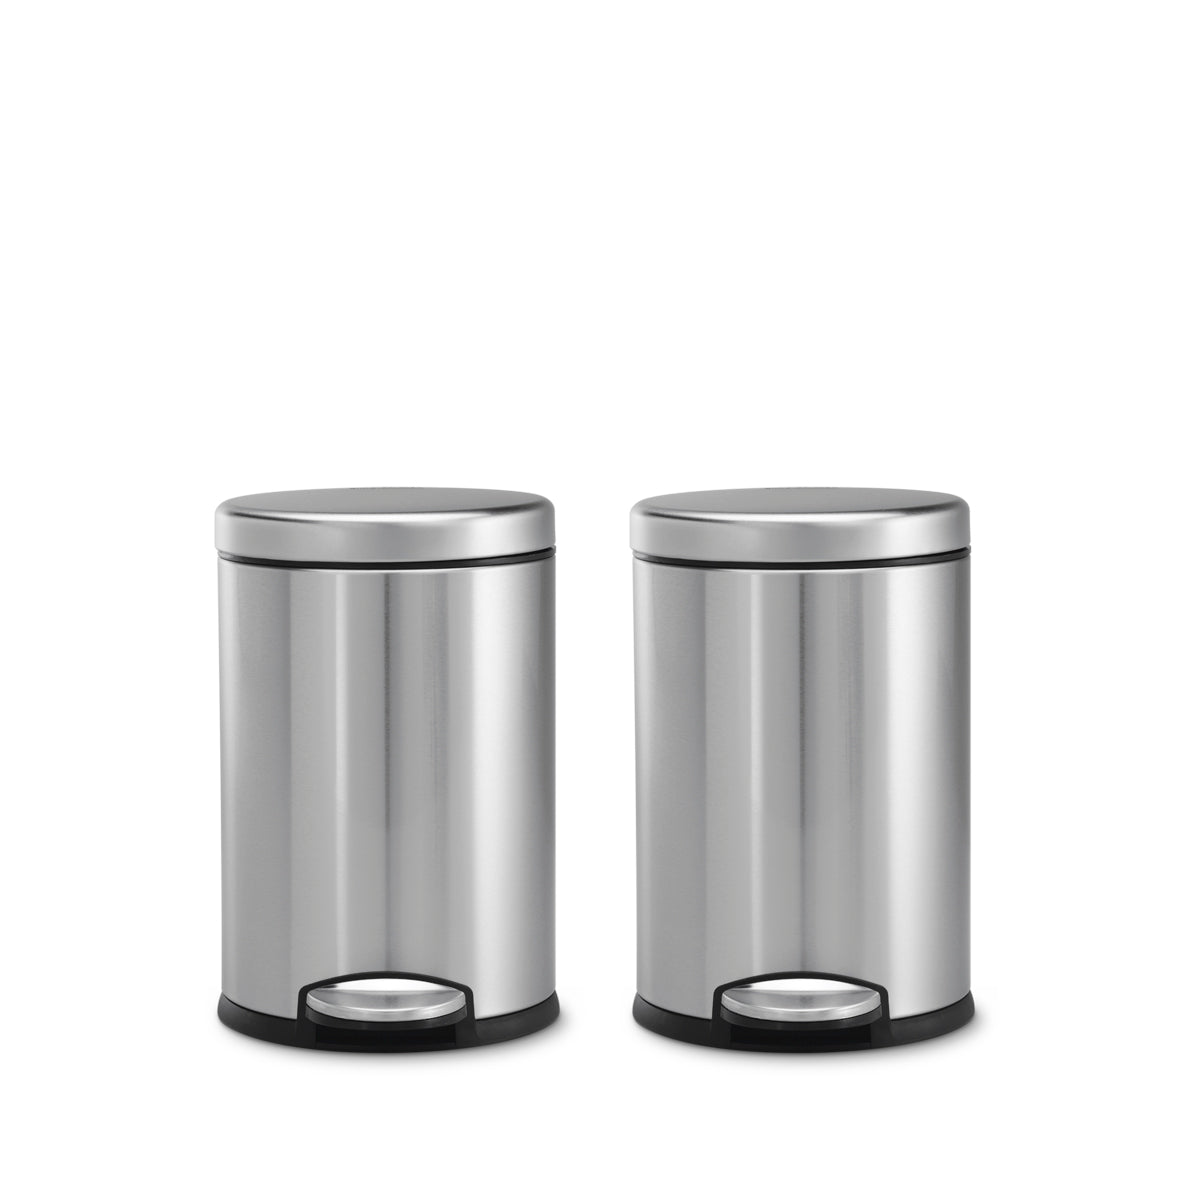 Simplehuman 4.5L Round Step Can, 2-Pack and Code A Liners, New Open Box